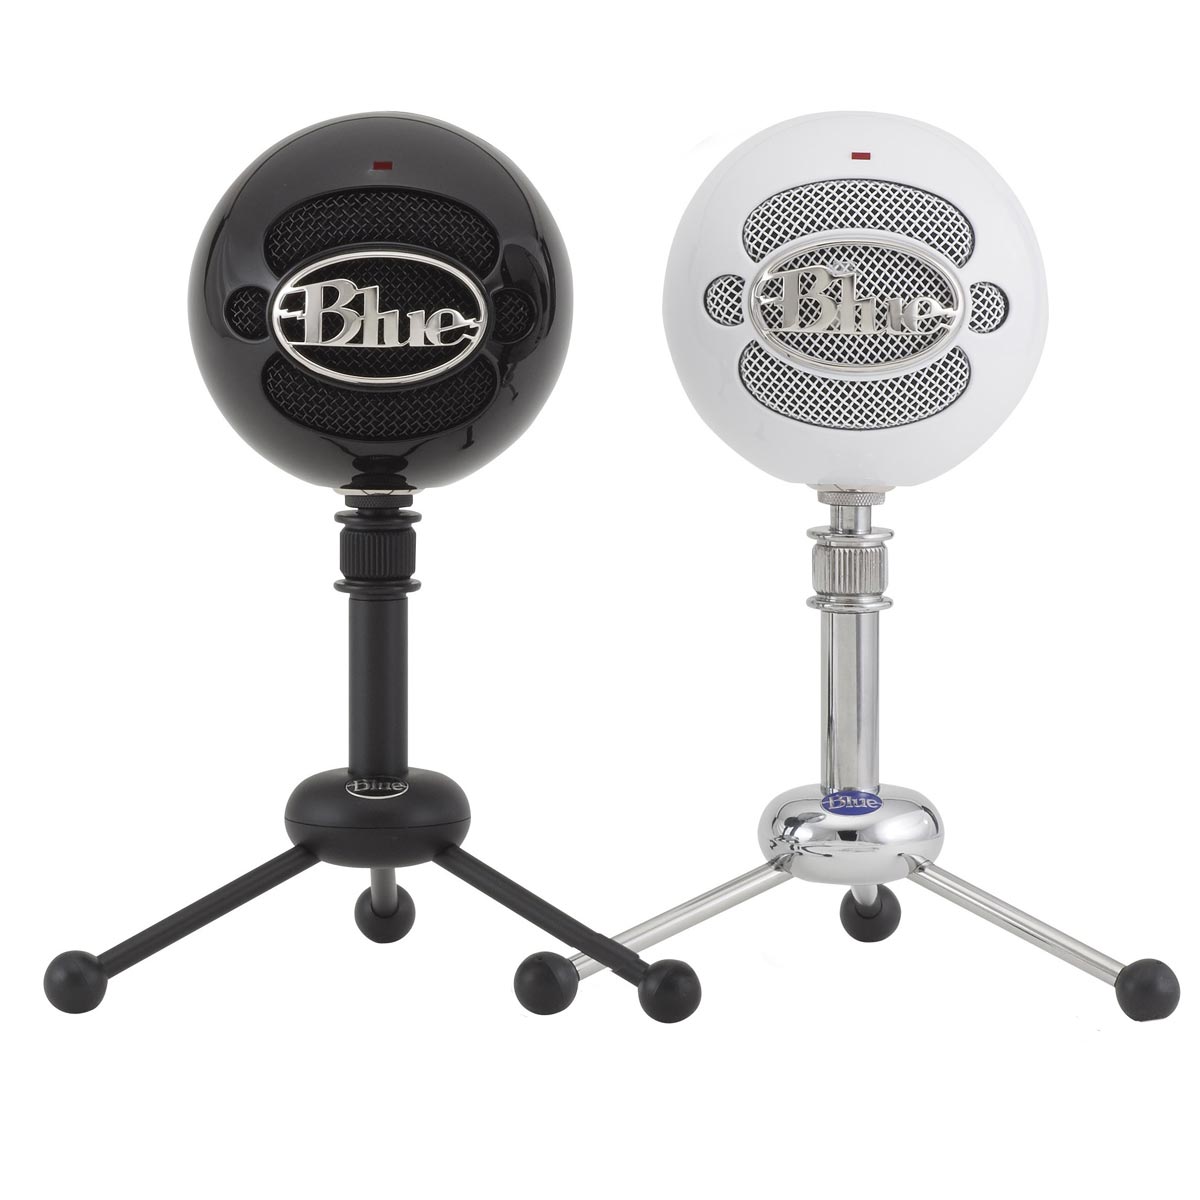 Blue Snowball ICE USB Microphone Price in BD